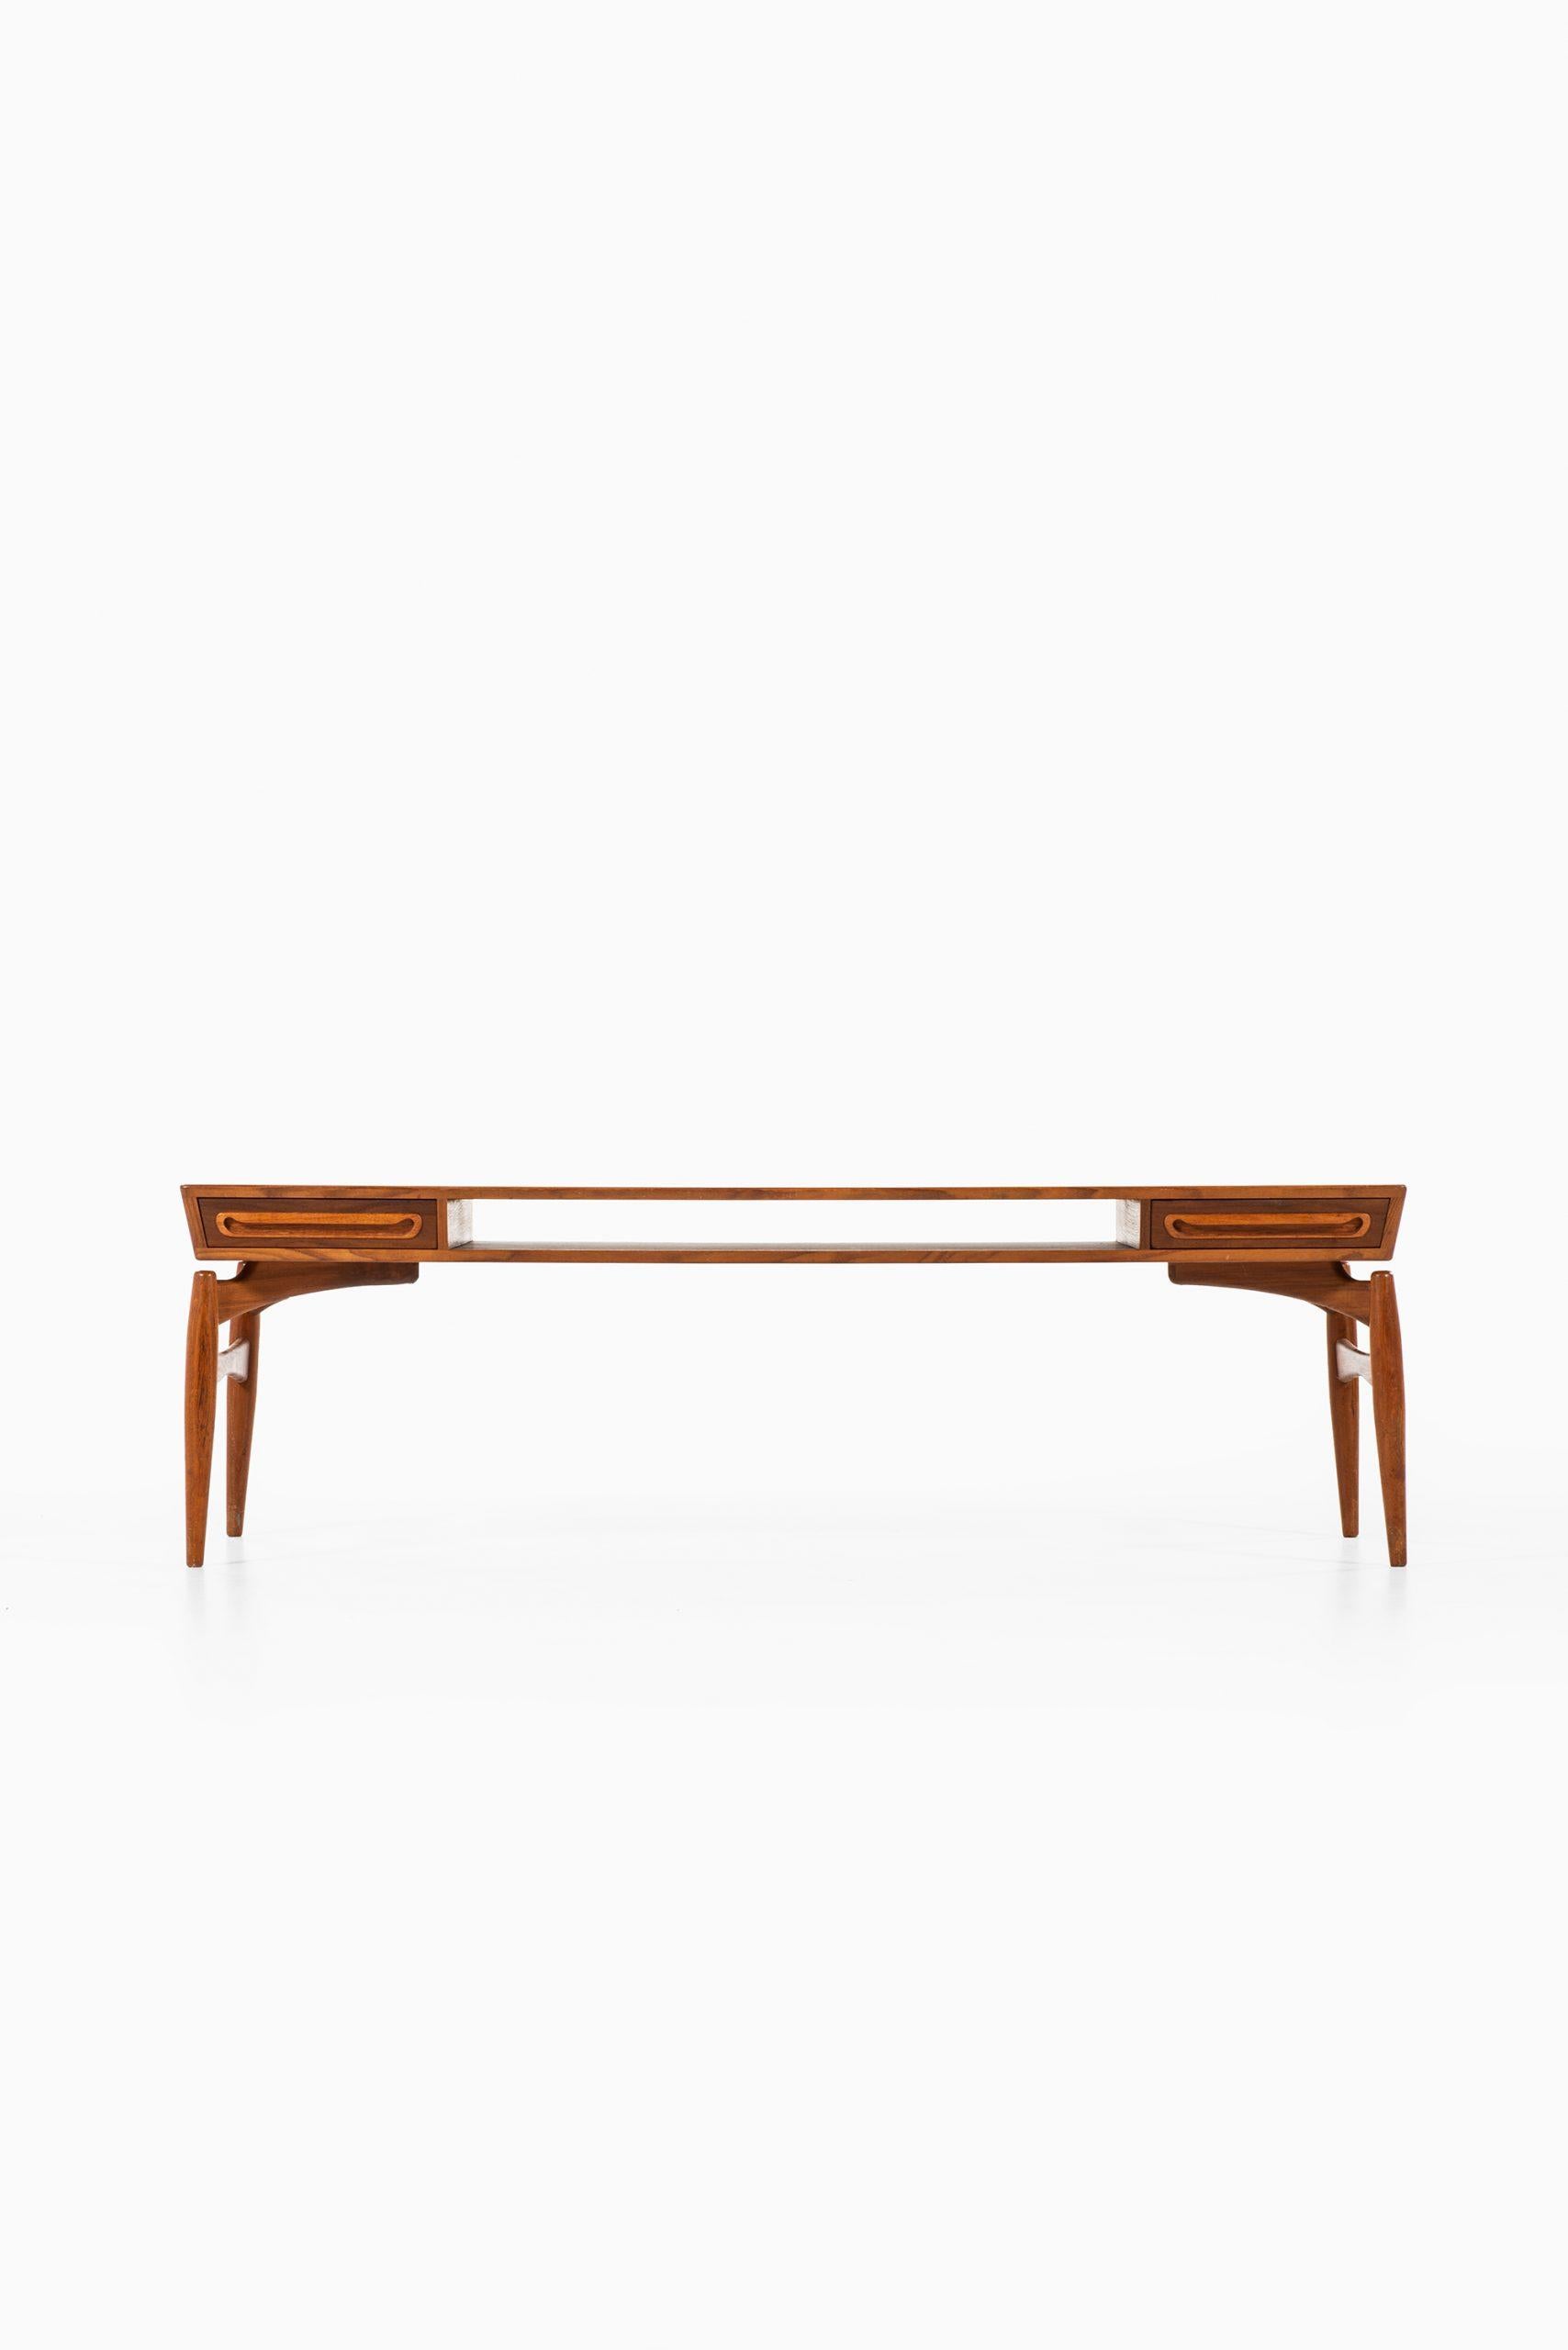 Rare coffee table with 2 drawers attributed to Johannes Andersen. Produced by Trensum möbelfabrik in Sweden.